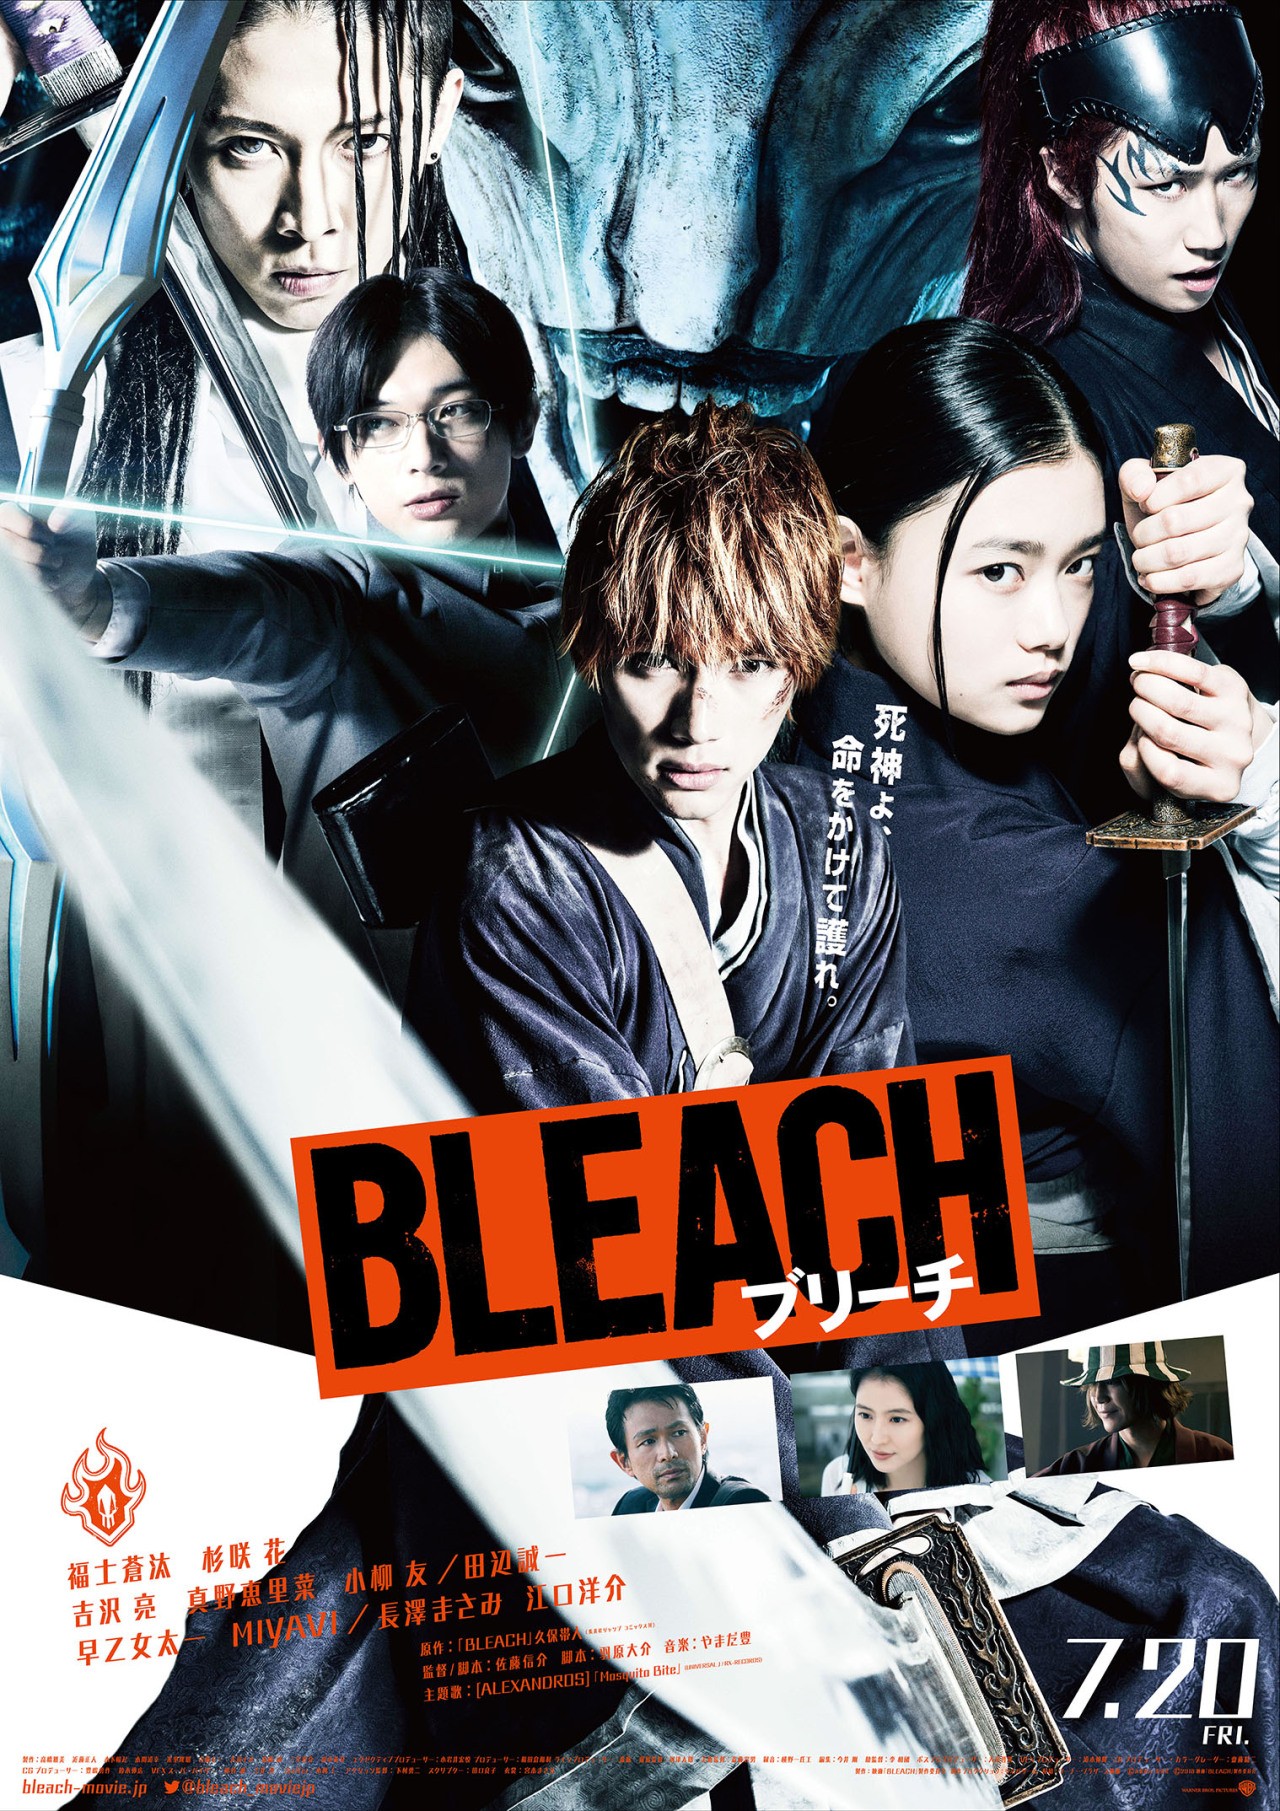 Where to watch Bleach TV series streaming online?